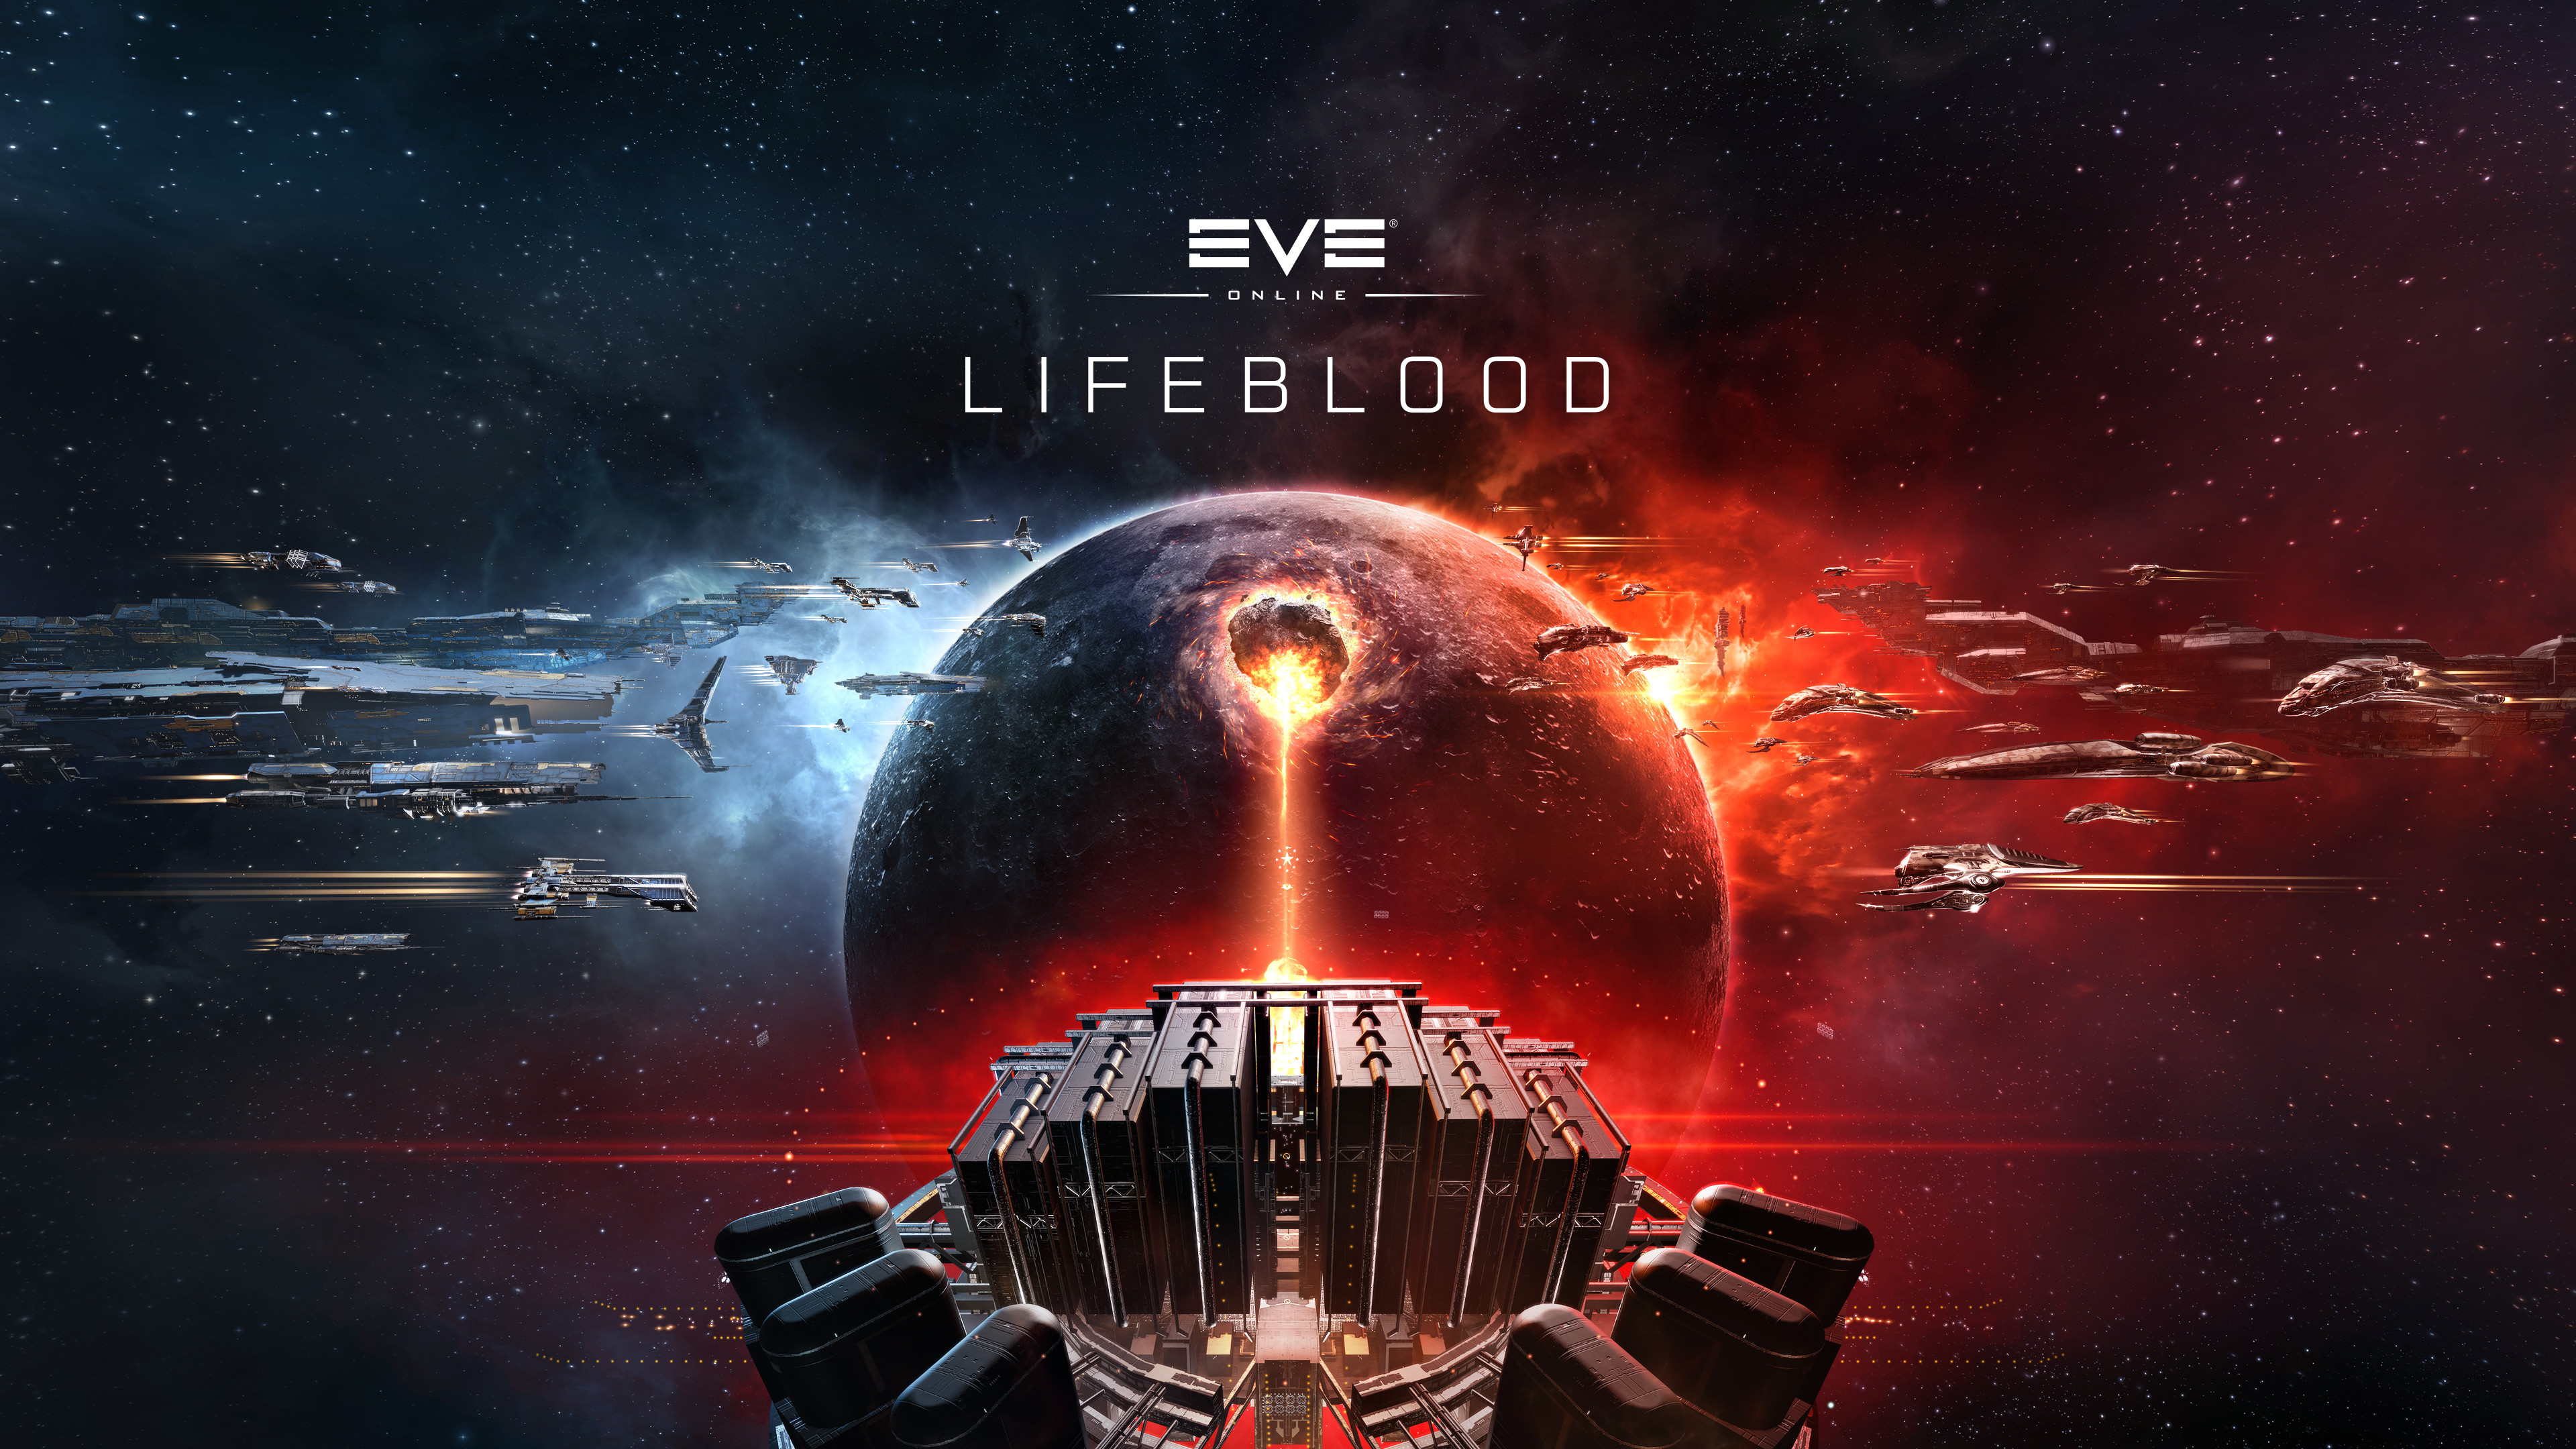 Eve Online Lifeblood Has Been Successfully Deployed Eve Online Images, Photos, Reviews